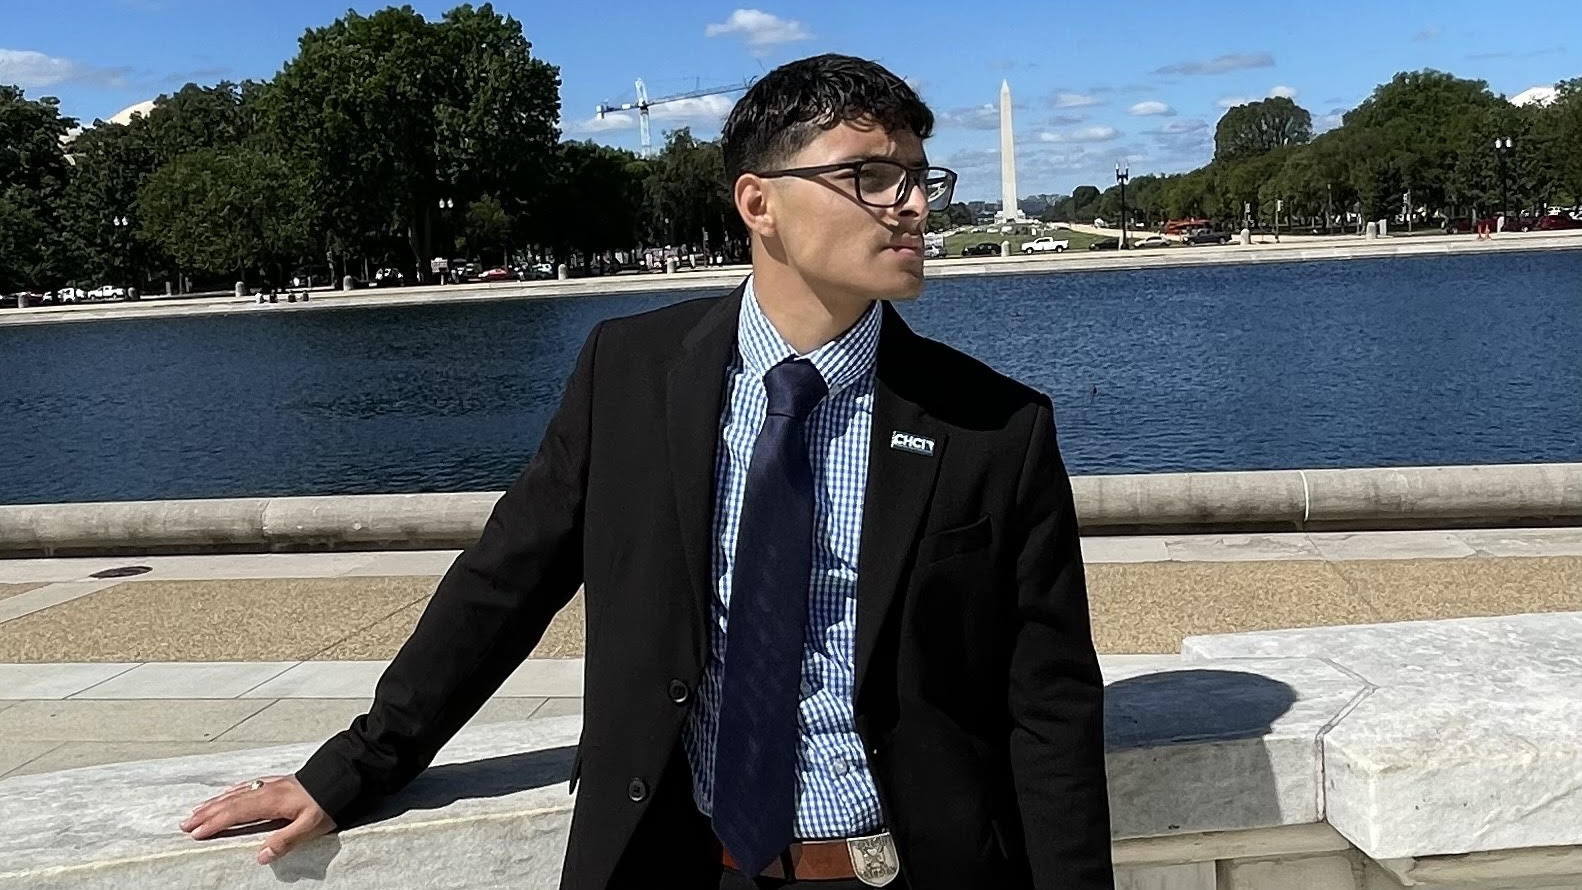 Jason Turcios, Public Policy Fellow for the Congressional Hispanic Caucus Institute (CHCI) in Washington D.C., stands with the Washington Monument in the background